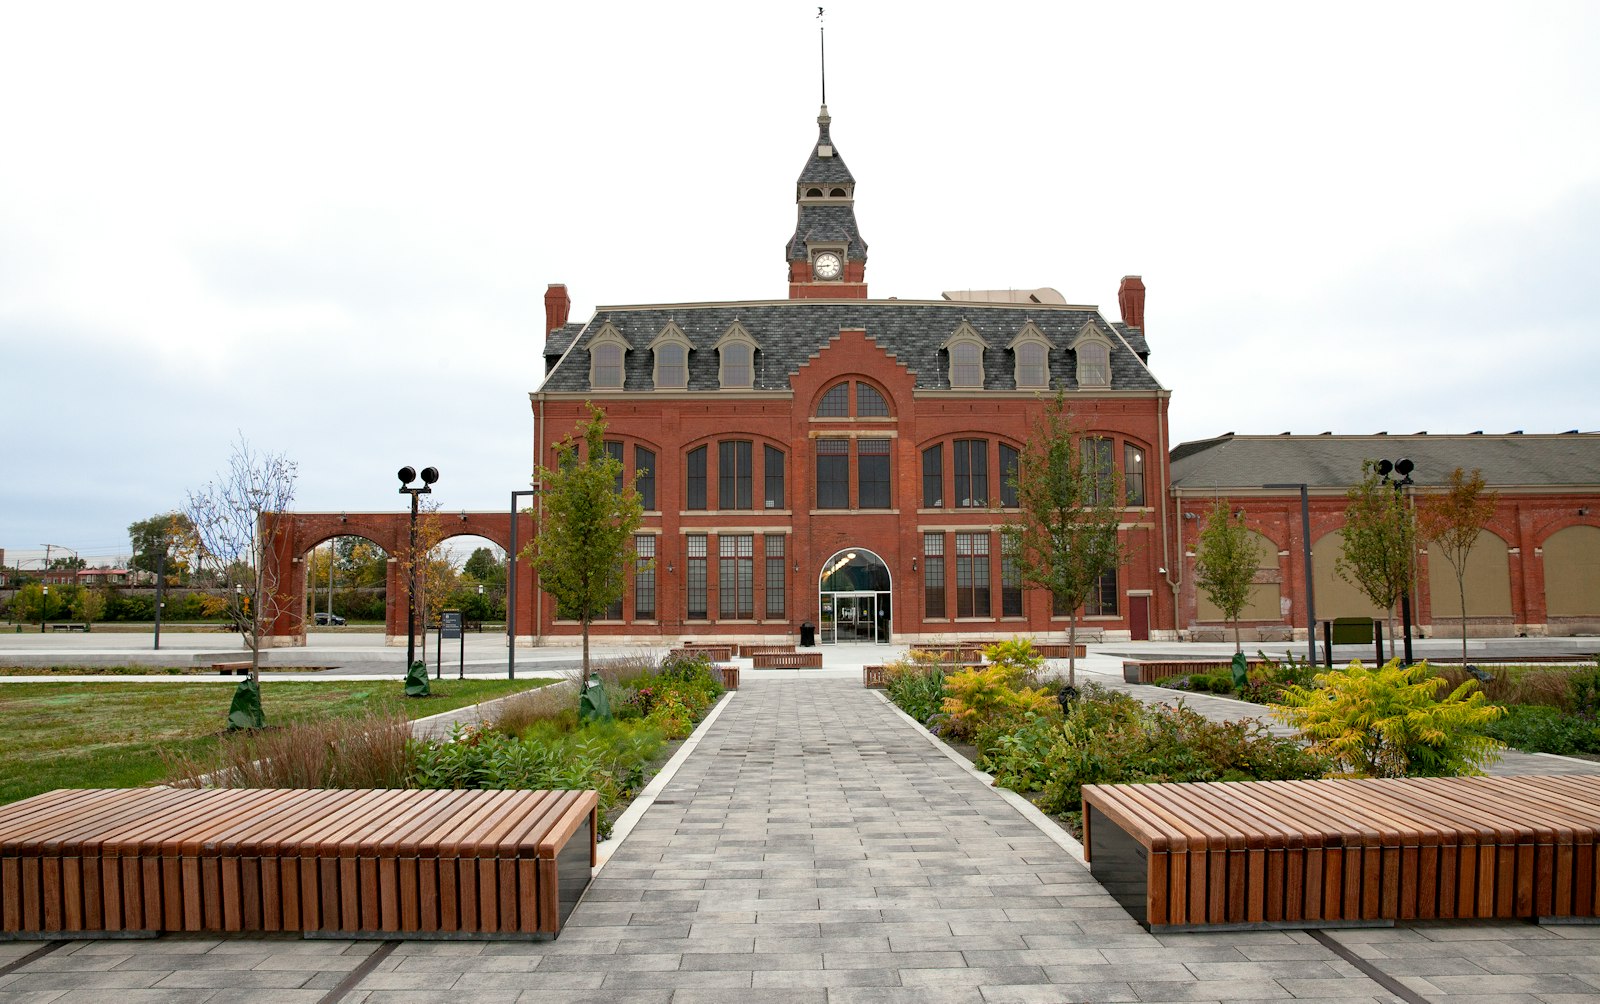 A paved pathway leads up to a three-story red brick building with a clocktower. Around the building are green, manicured lawns and benches